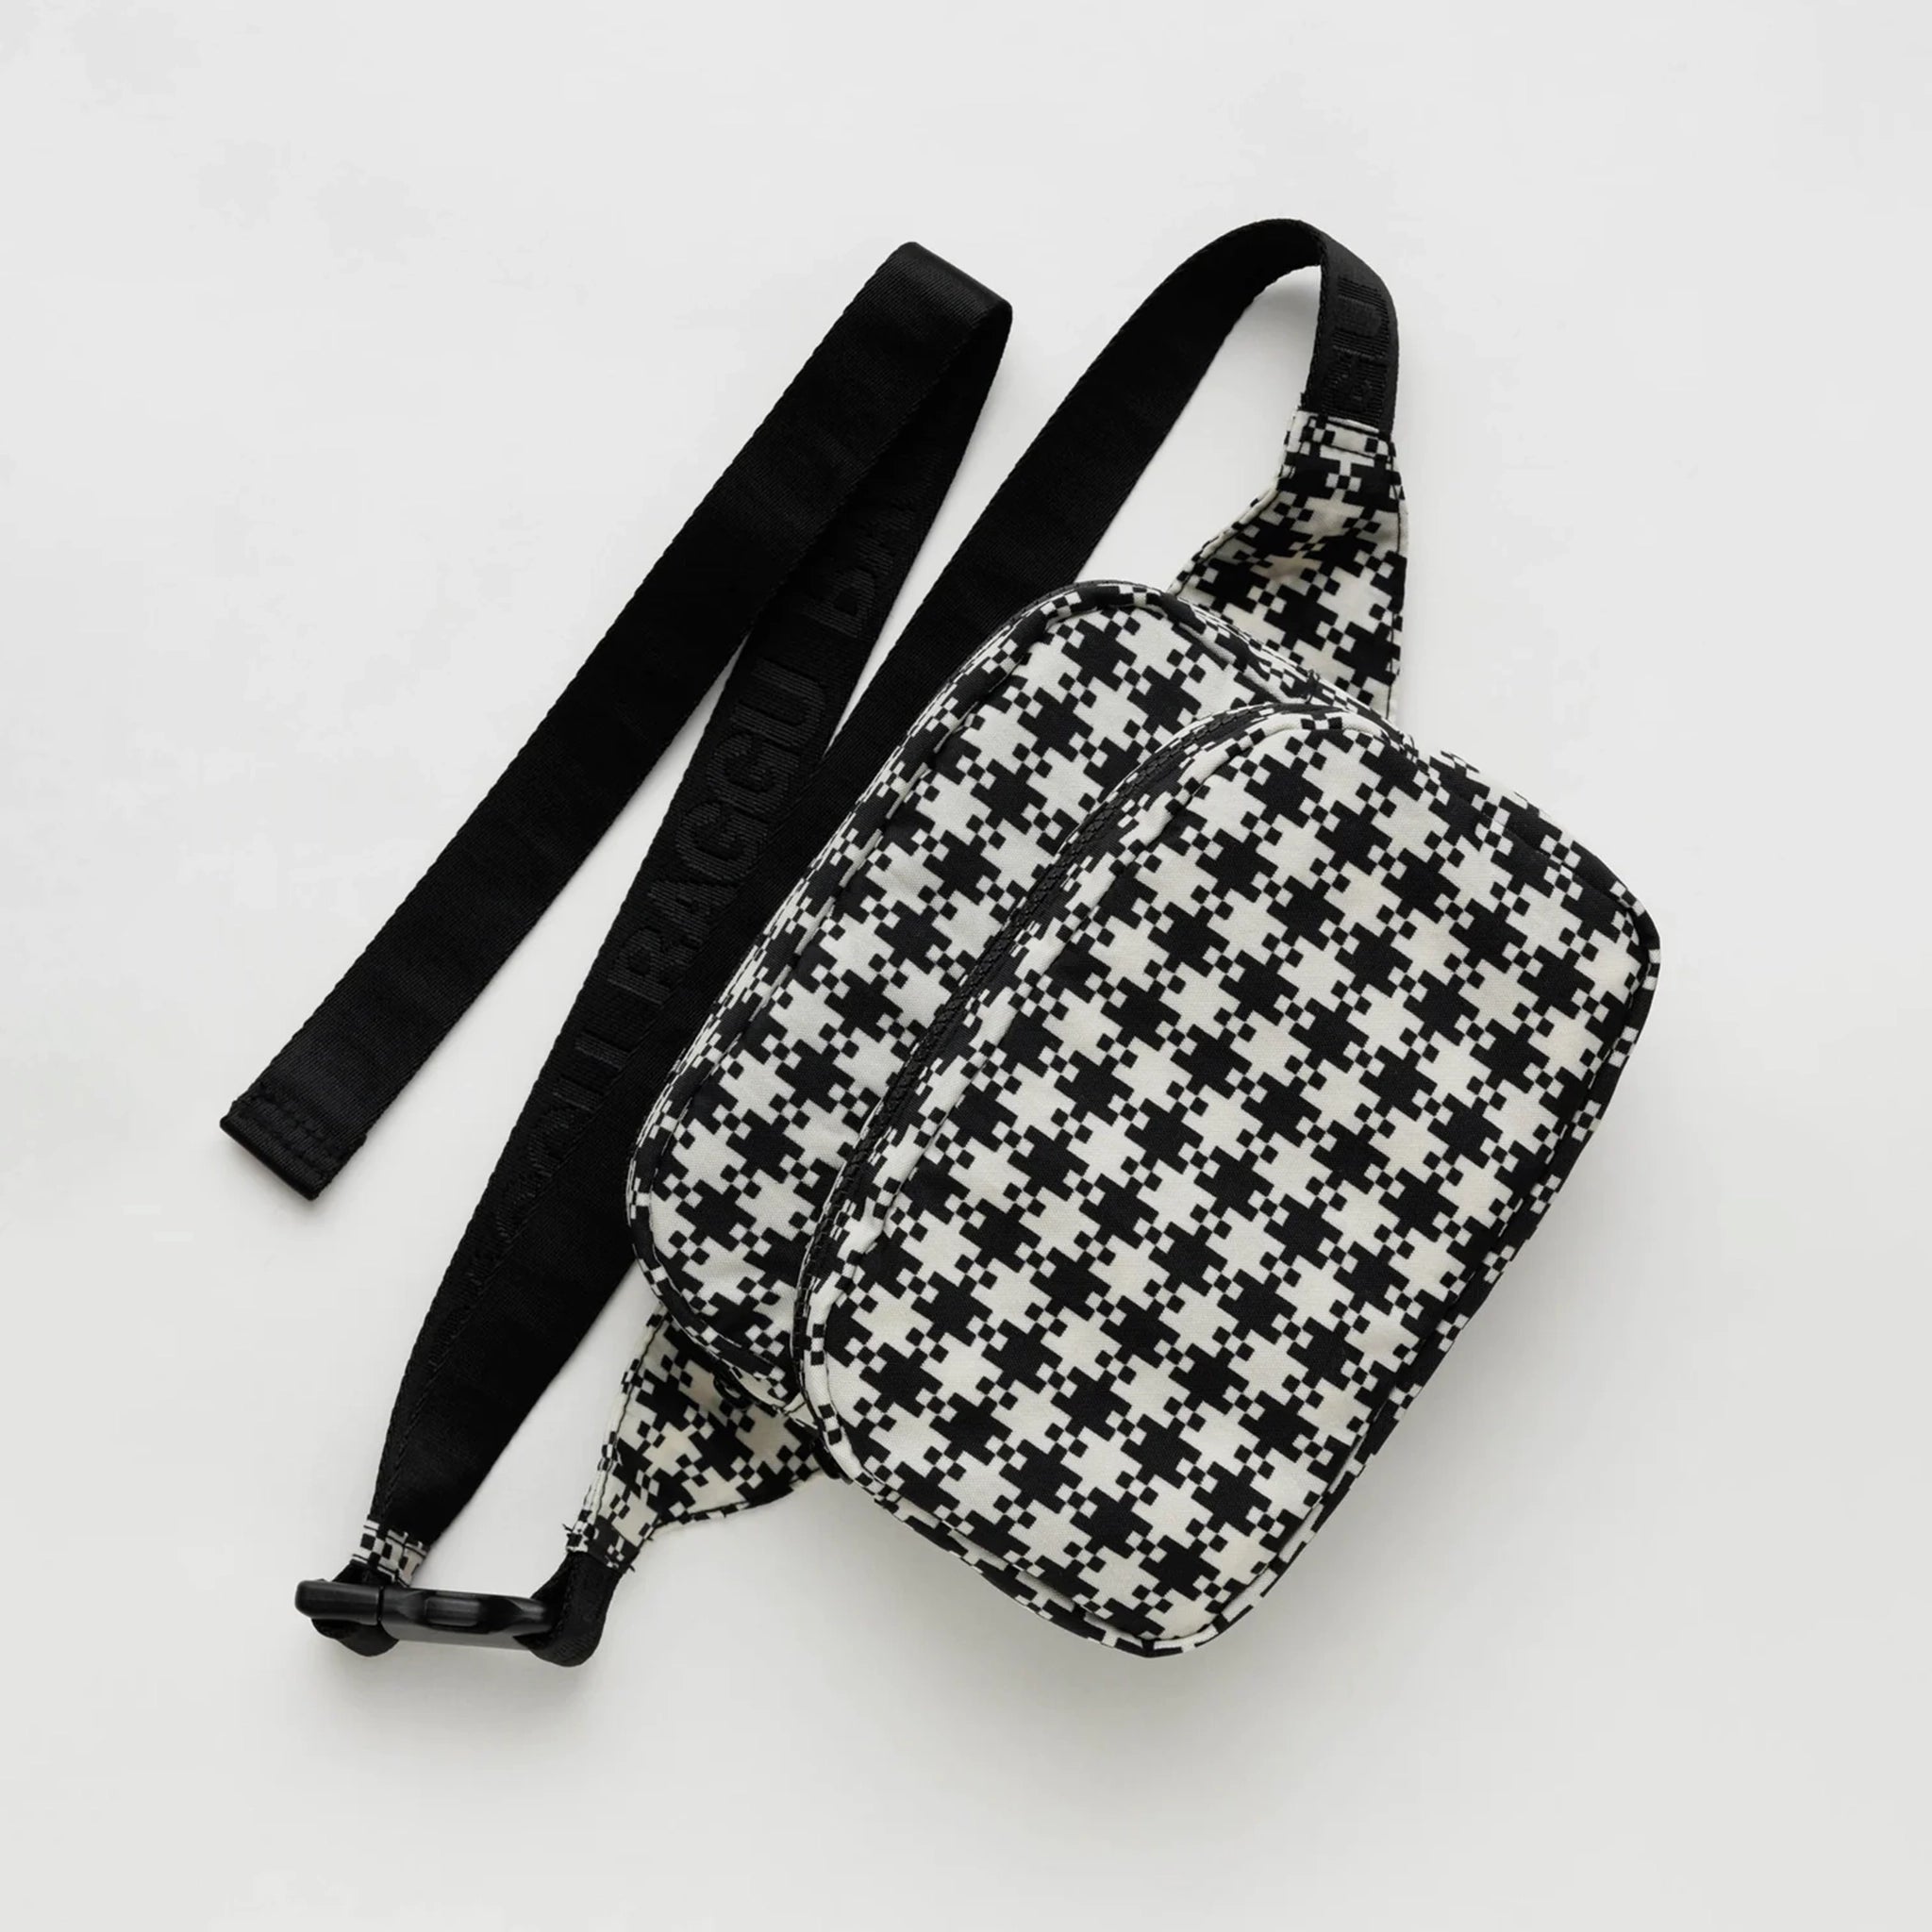 A black and white gingham nylon fanny pack with two zipper pockets and a black adjustable strap.